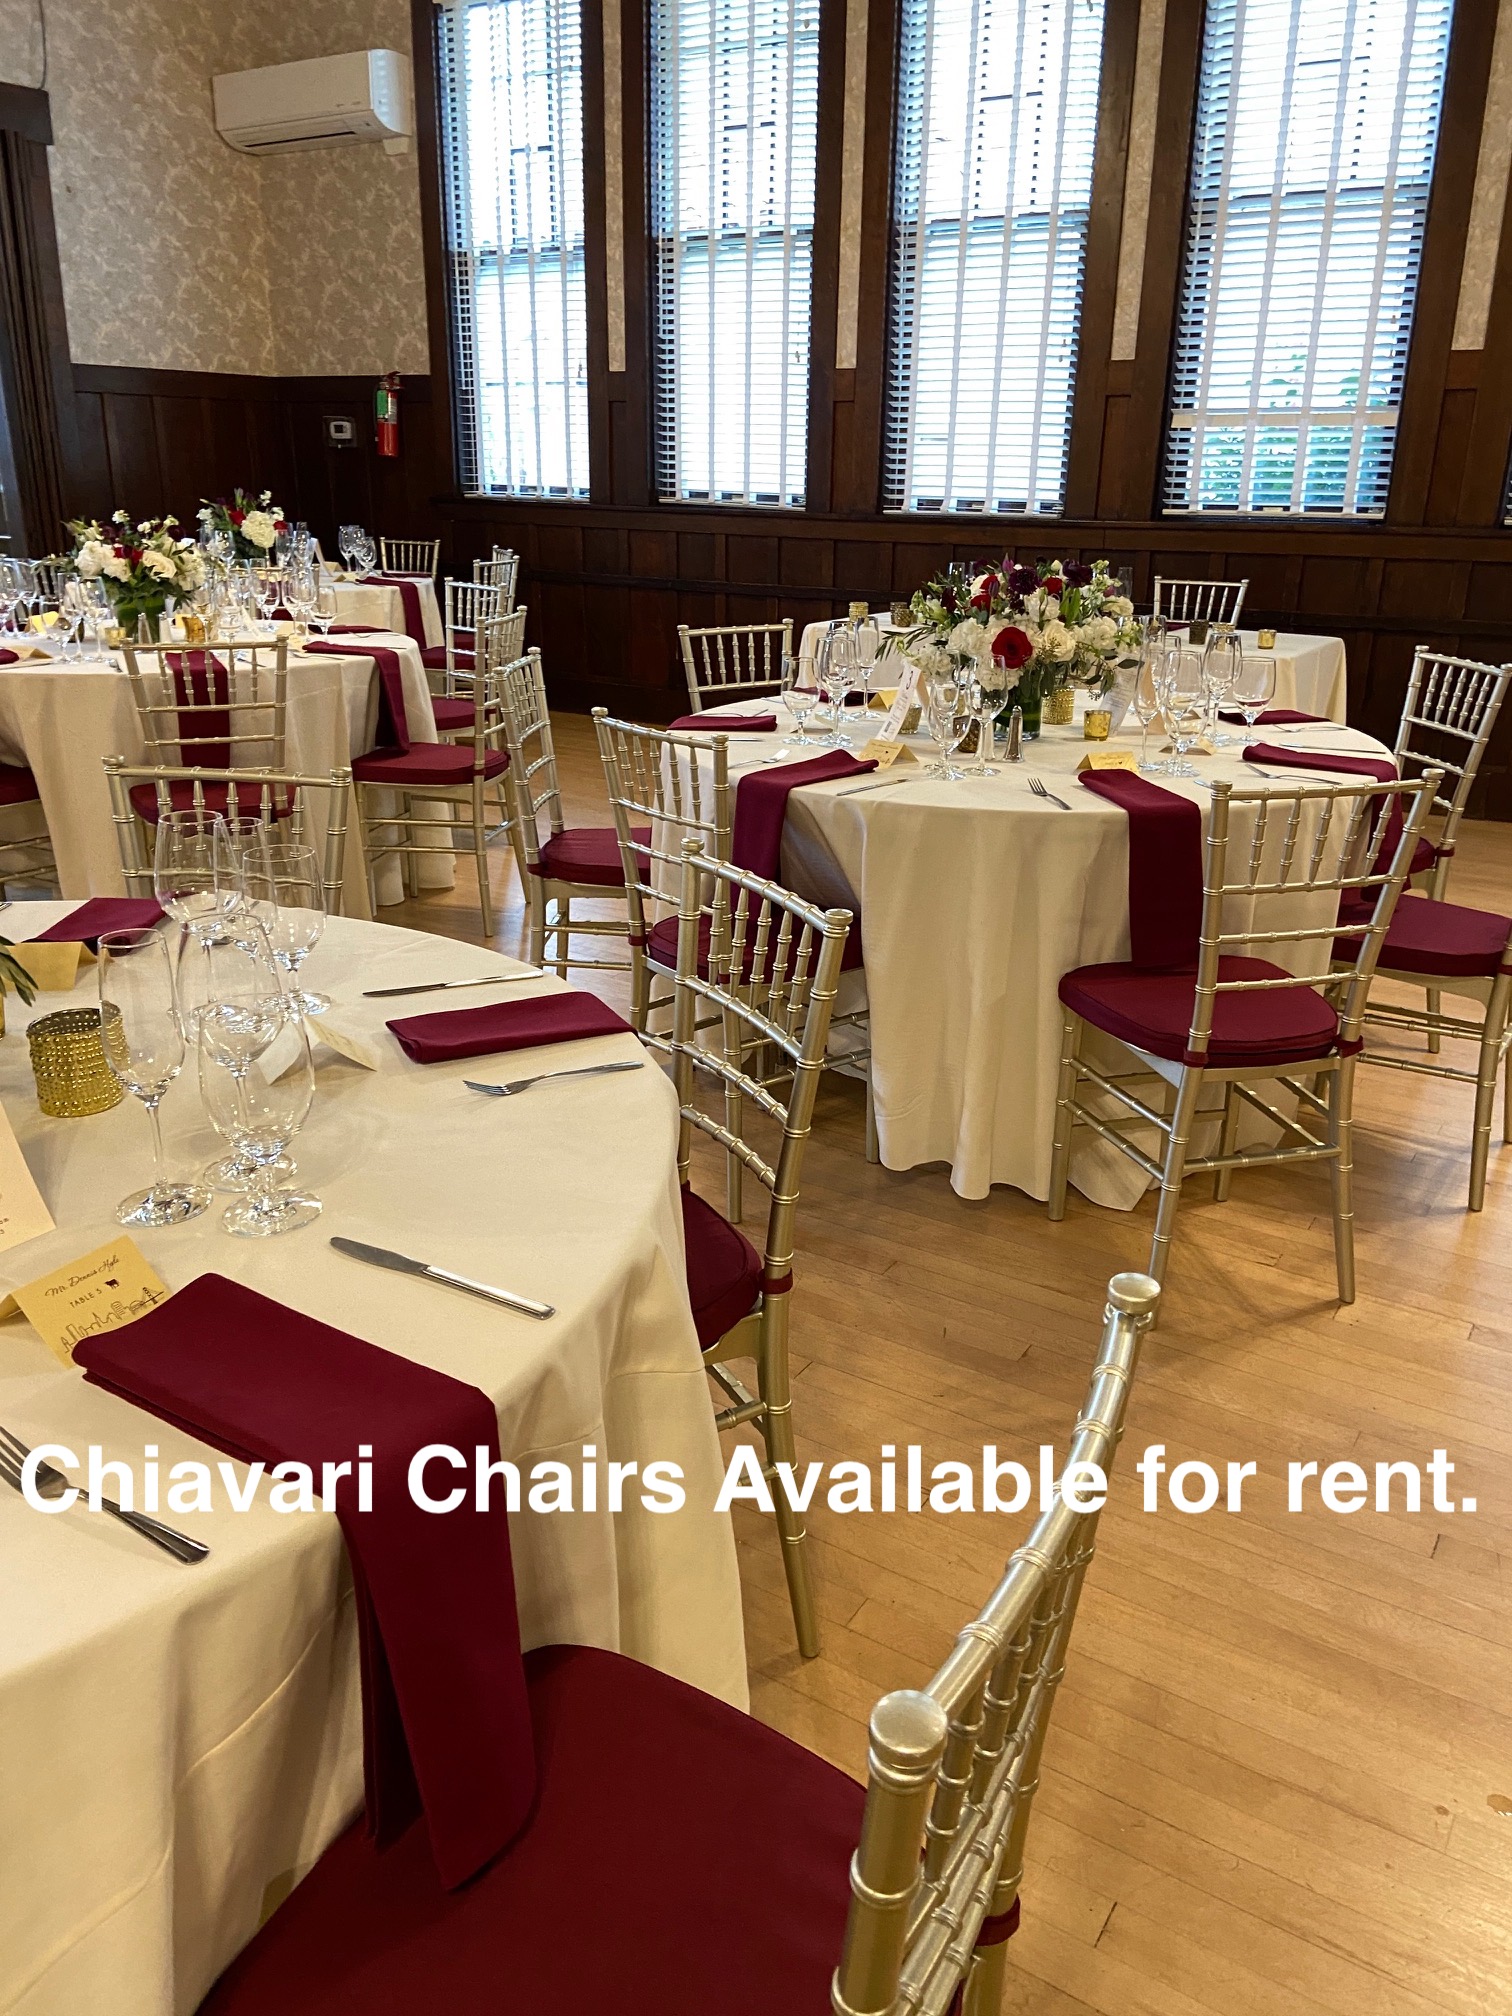 Clubhouse decorated for wedding with rented Chiavari chairs.